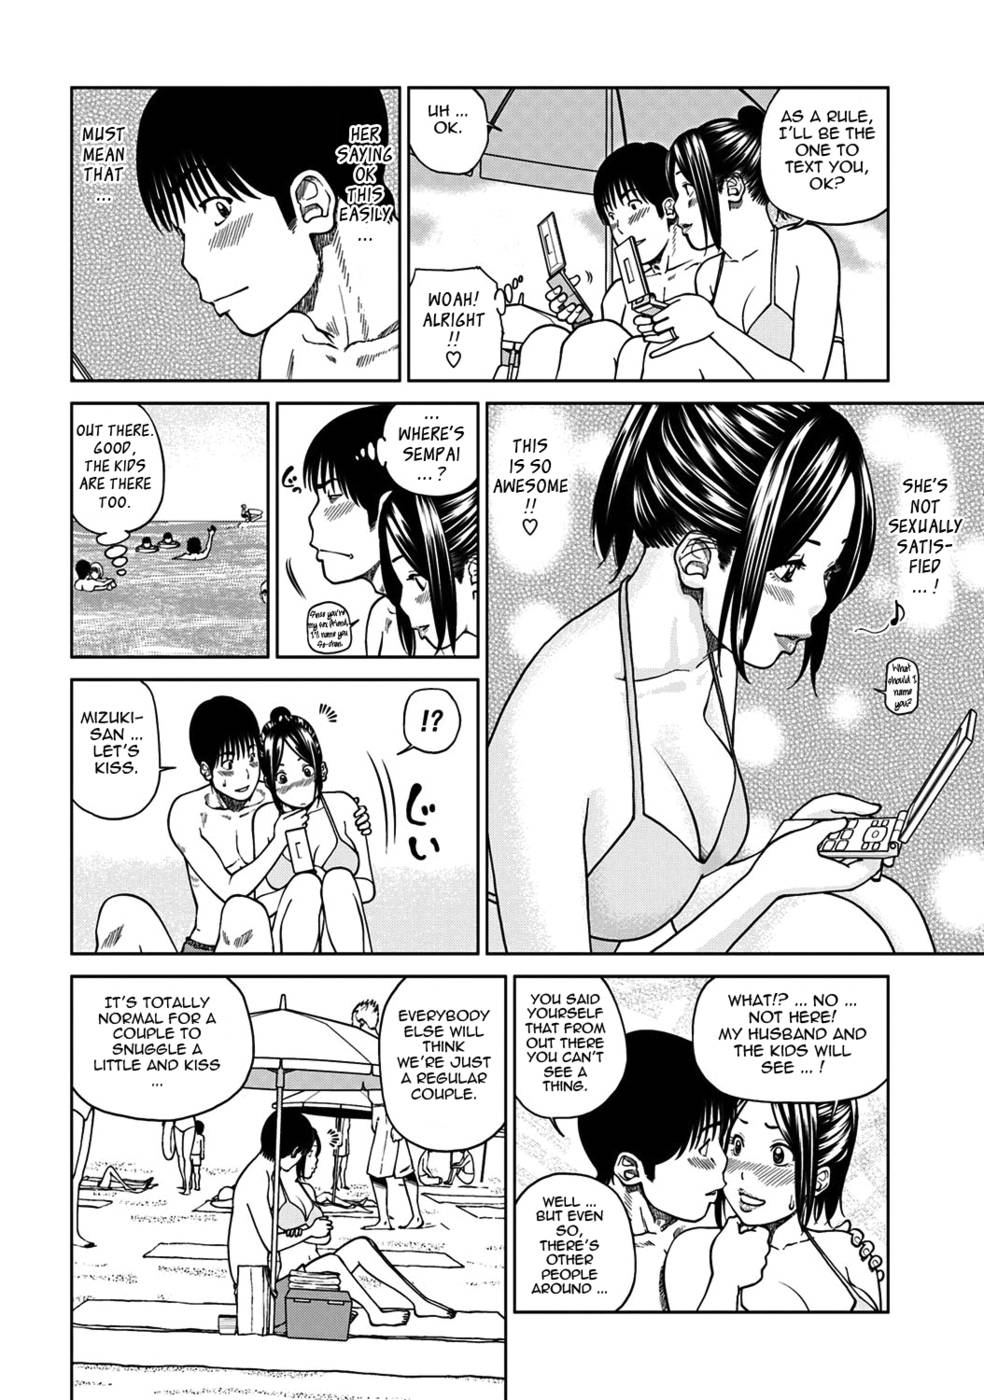 33 Year Old Unsatisfied Wife-Chapter 7-The Married Woman Who Became A Sex Friend-Hentai Manga Hentai Comic pic